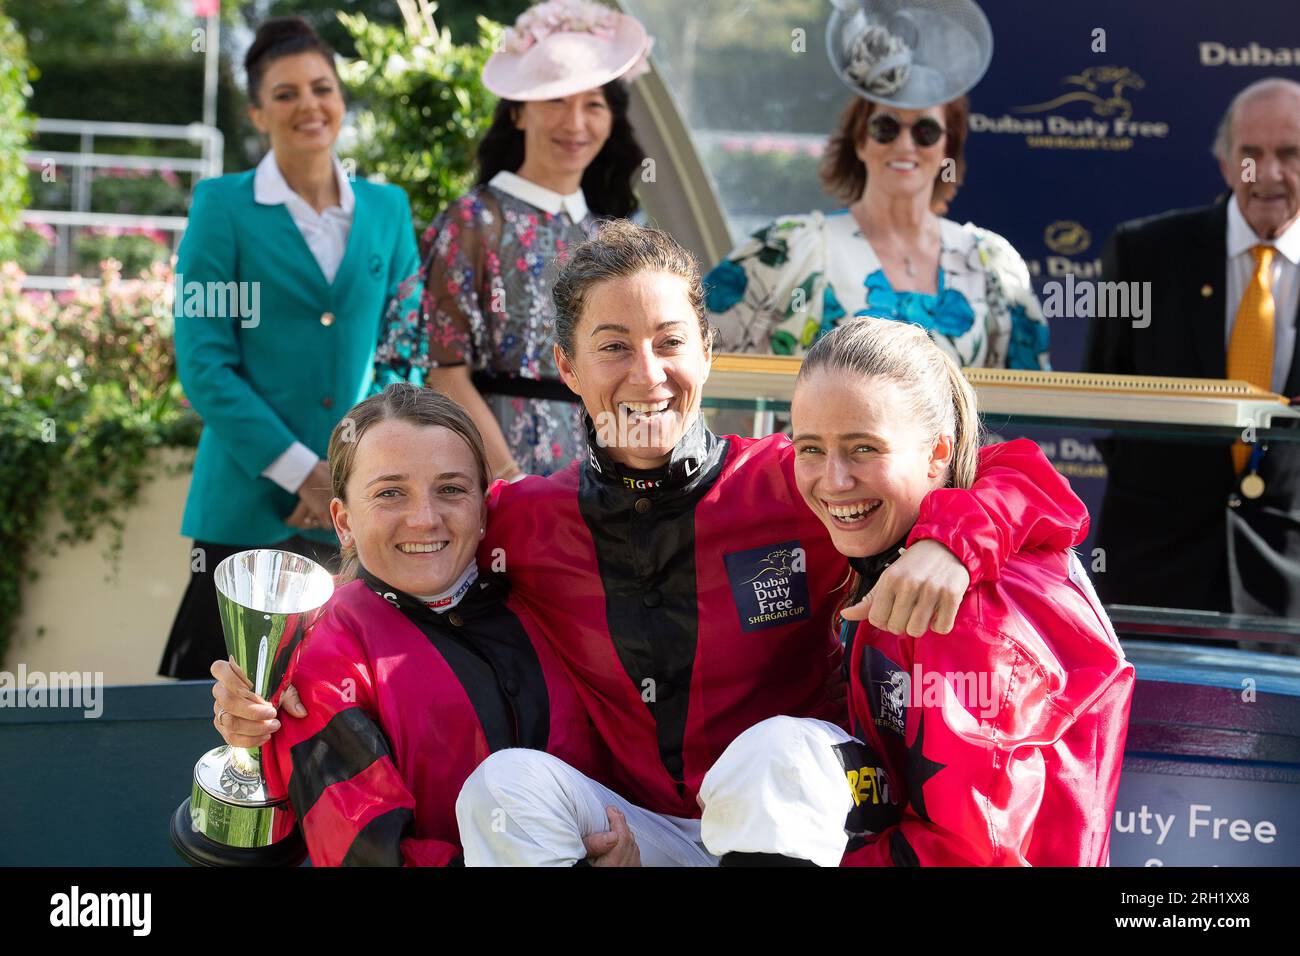 Ascot, Berkshire, UK. 12th August, 2023. Fun and laughter for winning The Ladies Team of Hollie Doyle (L), Captain Hayley Turner (M) and Saffie Osborne (R) who won the overall team at the Dubai Duty Free Shergar Cup at Ascot Racecourse today. Credit: Maureen McLean/Alamy Live News Stock Photo